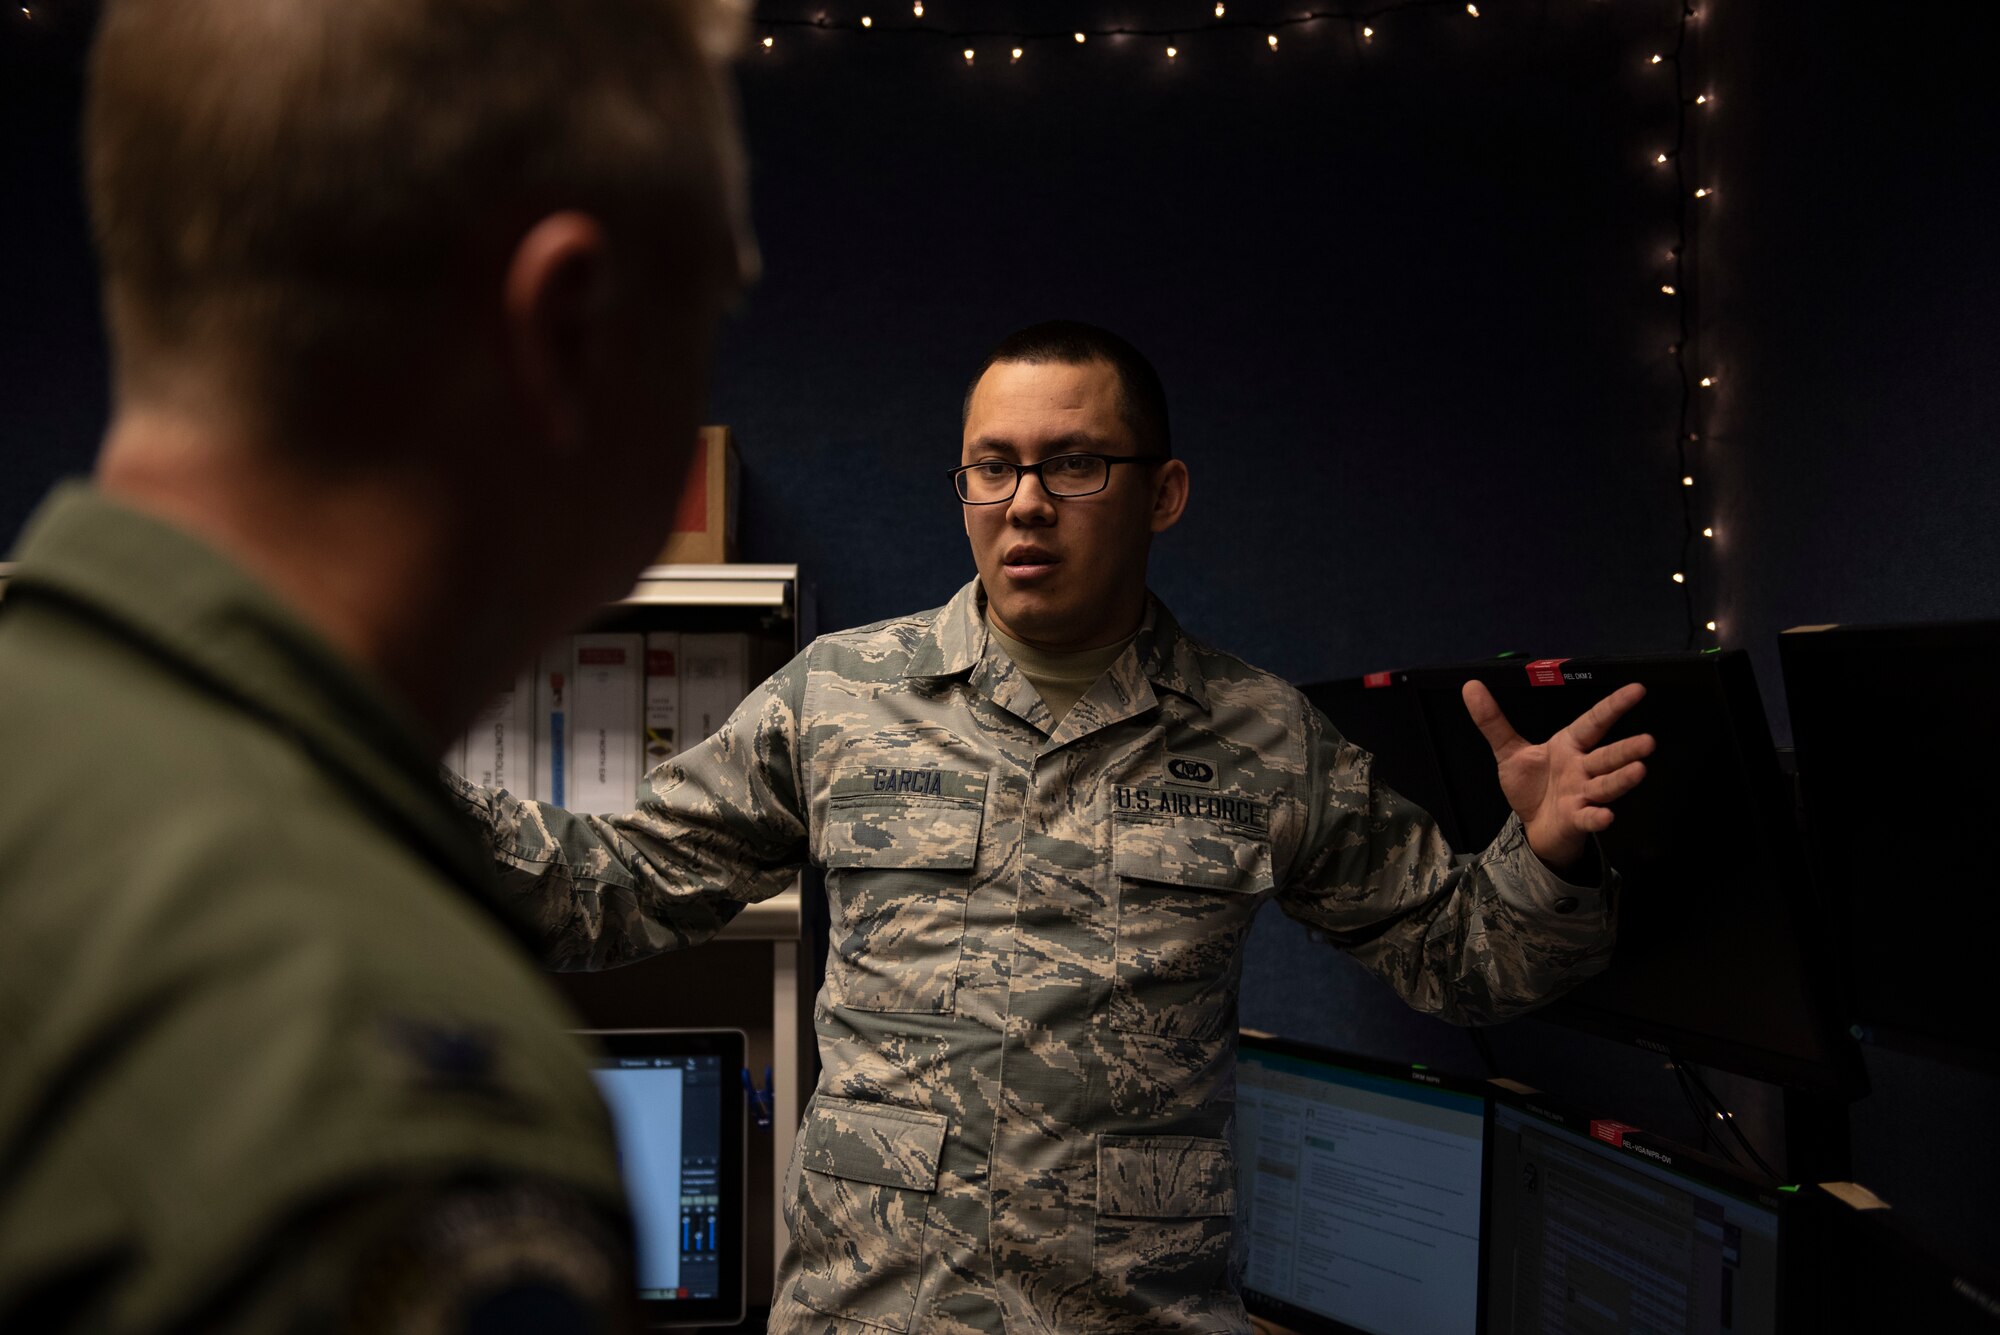 U.S. Air Force Senior Airman Alan Garcia, 325th Fighter Wing Tyndall Command Center junior emergency actions controller, briefs U.S. Col. Brain Laidlaw, 325th FW commander, on emergency action procedures at Tyndall Air Force Base, Florida, Jan. 24, 2020. Garcia  and his team receive, process, and disseminate emergency action, anti-terrorism, and force protection messages. (U.S. Air Force photo by Staff Sgt. Magen M. Reeves)